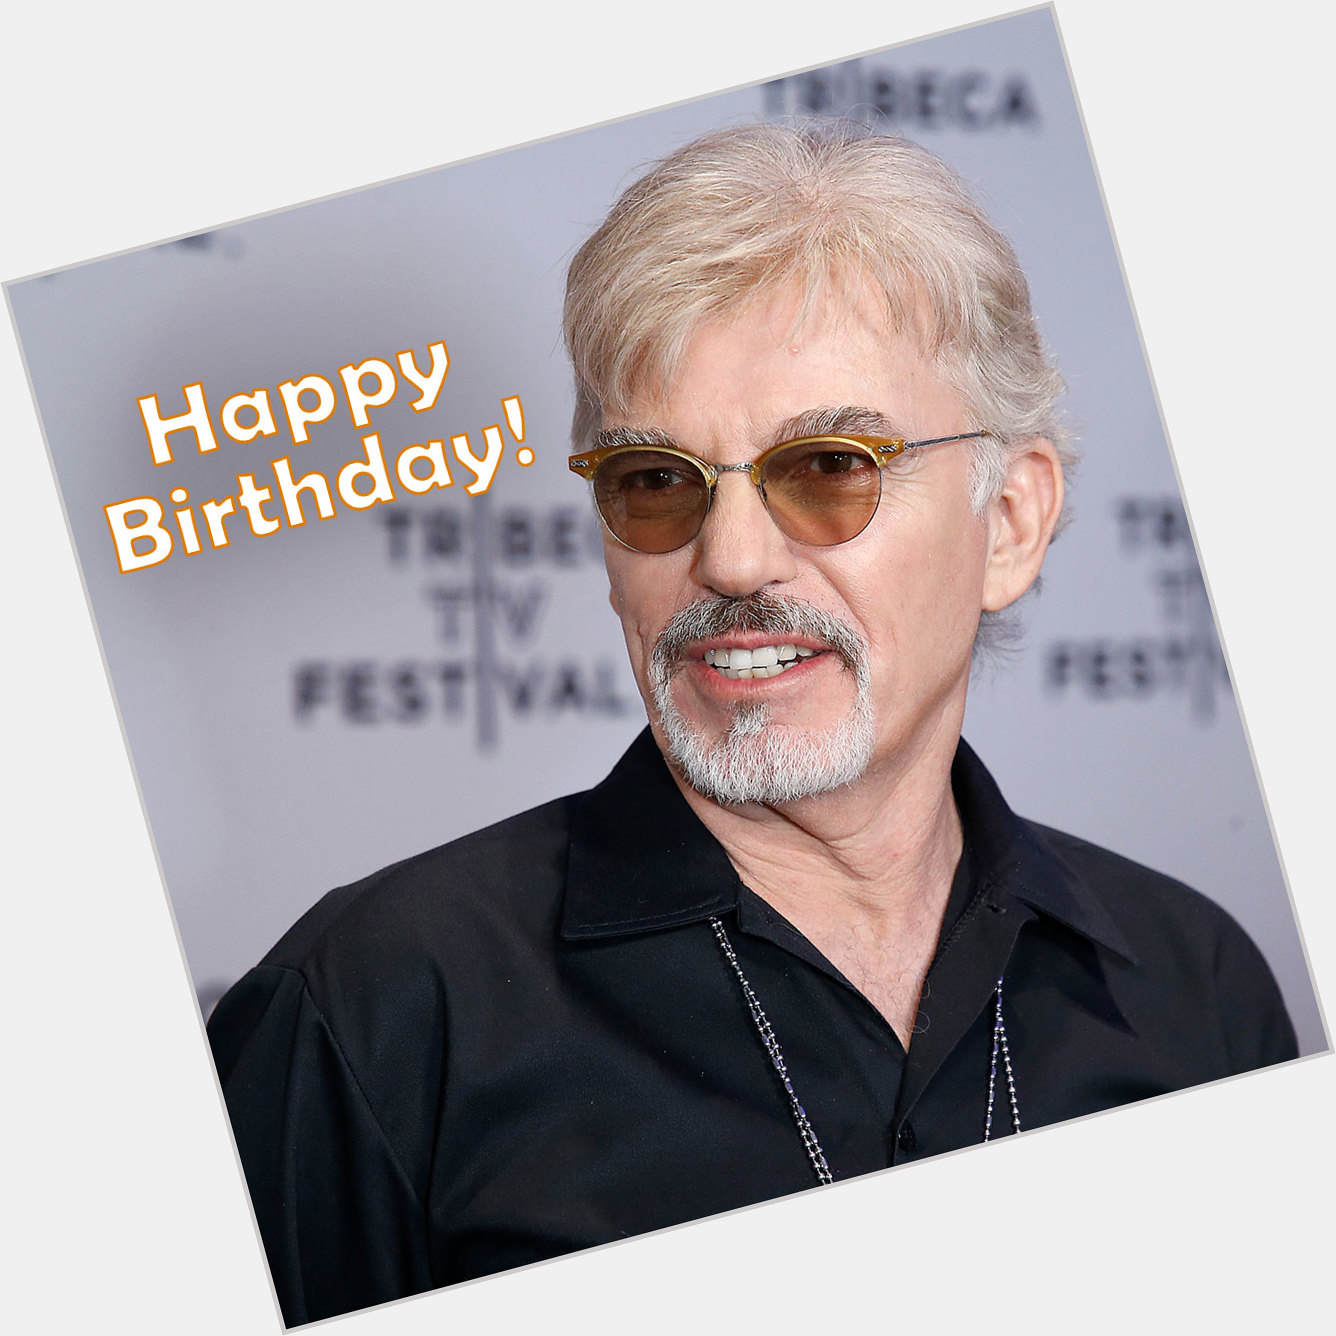 Happy birthday to Billy Bob Thornton. The actor is 65 today! 